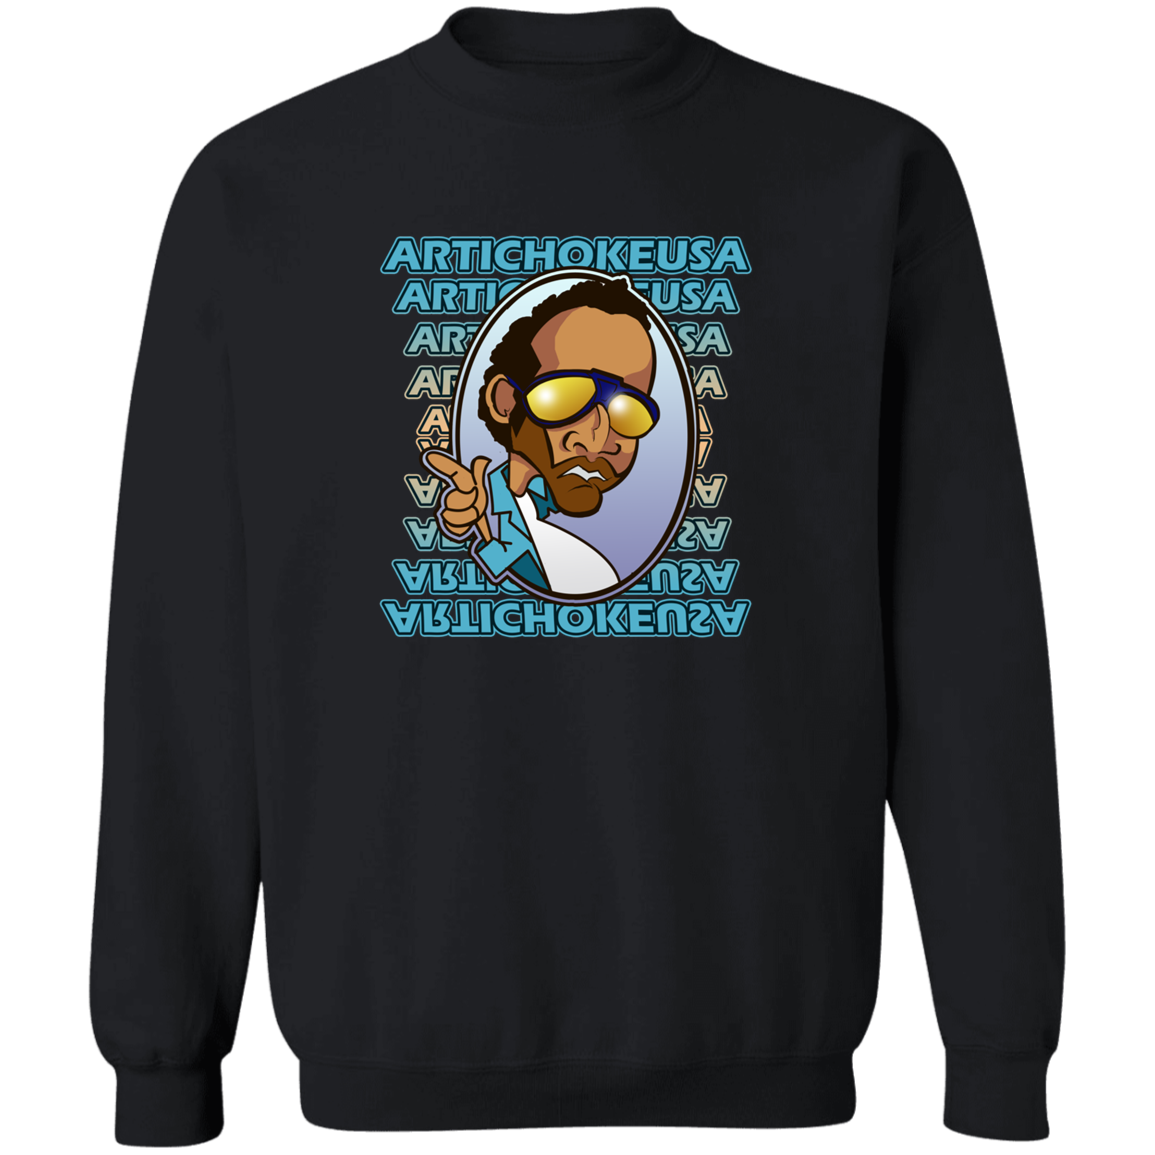 ArtichokeUSA Character and Font design. Let's Create Your Own Team Design Today. My first client Charles. Crewneck Pullover Sweatshirt